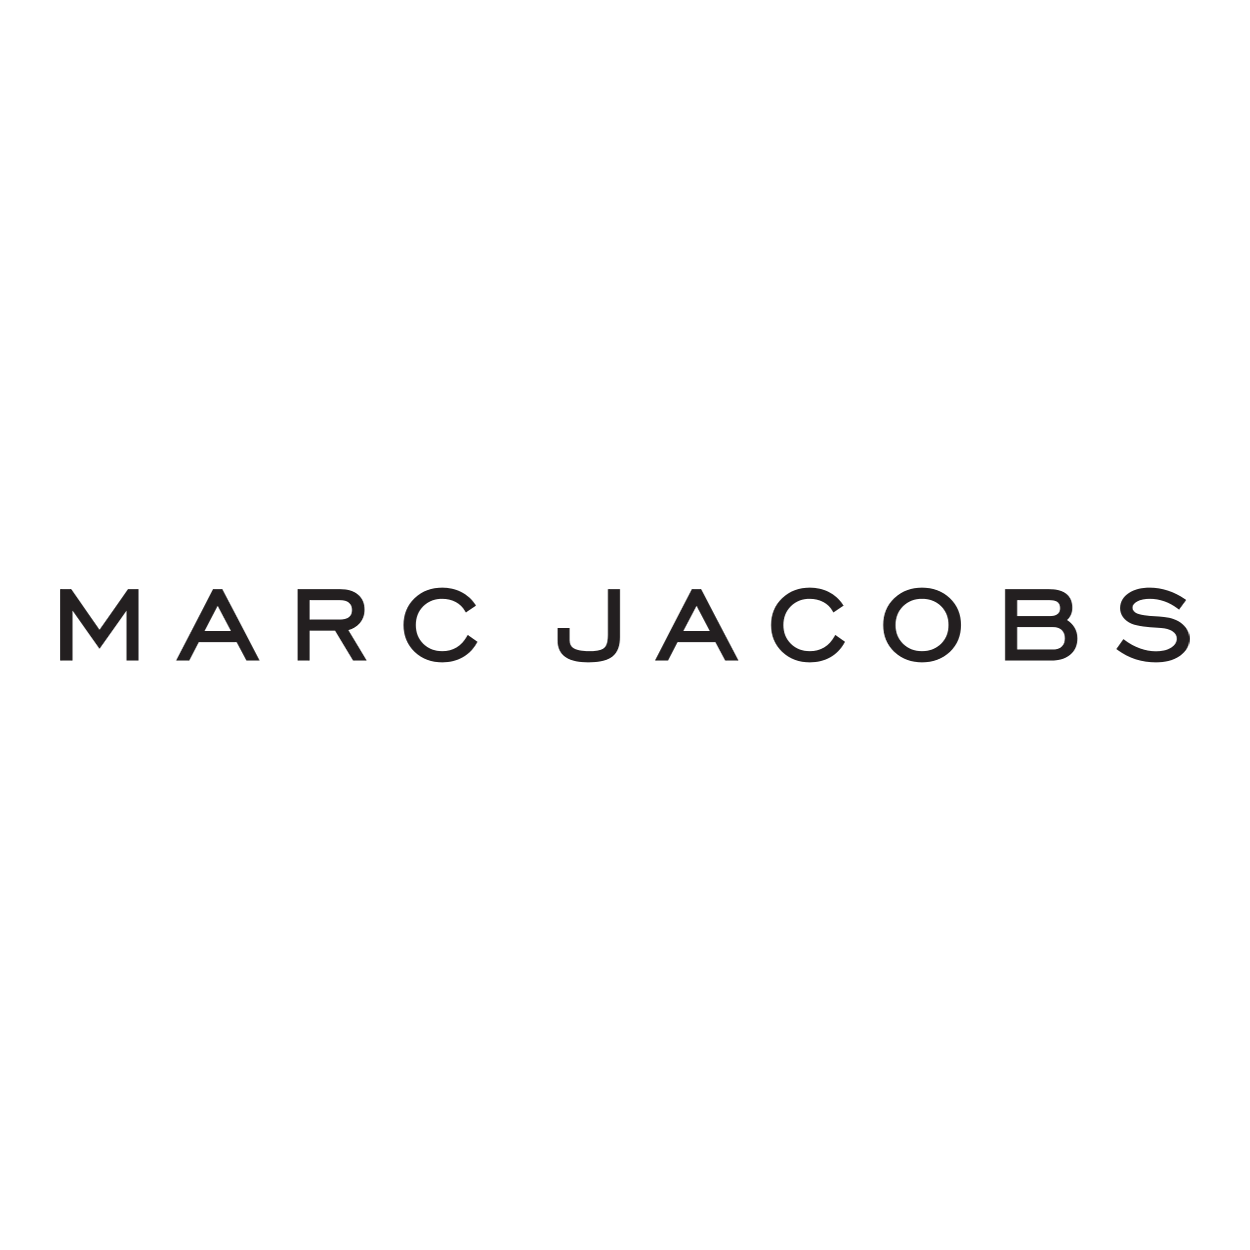 What is Marc Jacobs's net worth?